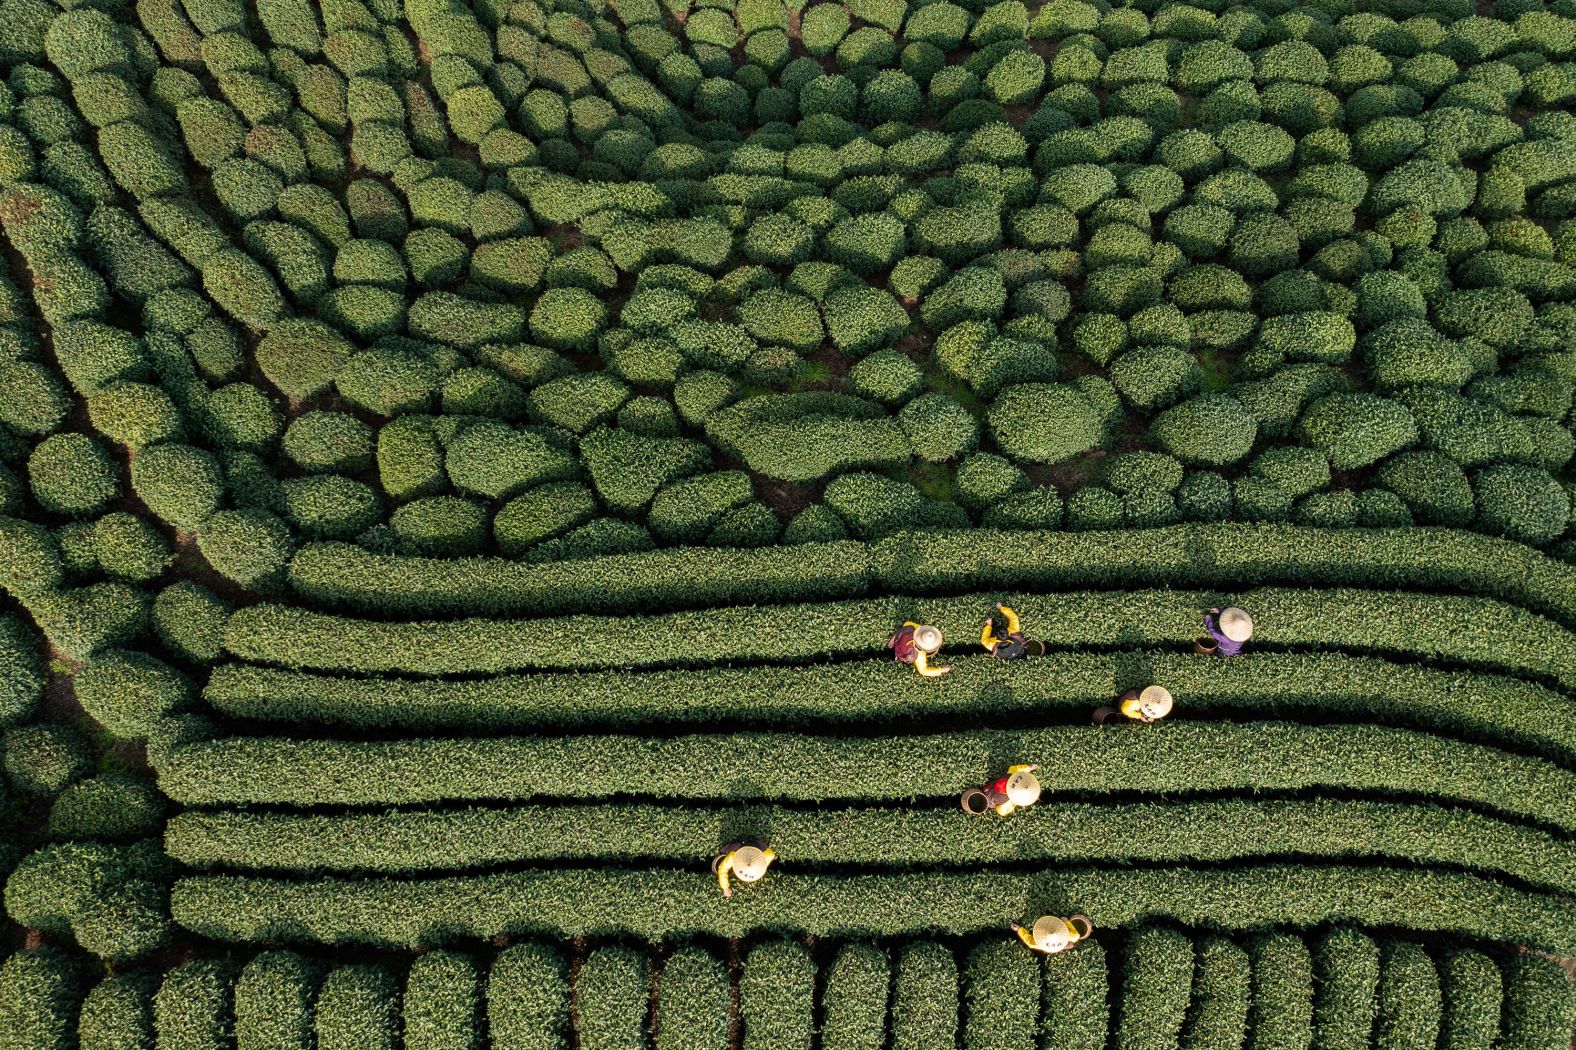 Workers harvest Longjing tea leaves in Zhejiang, China, on Monday, March 13.